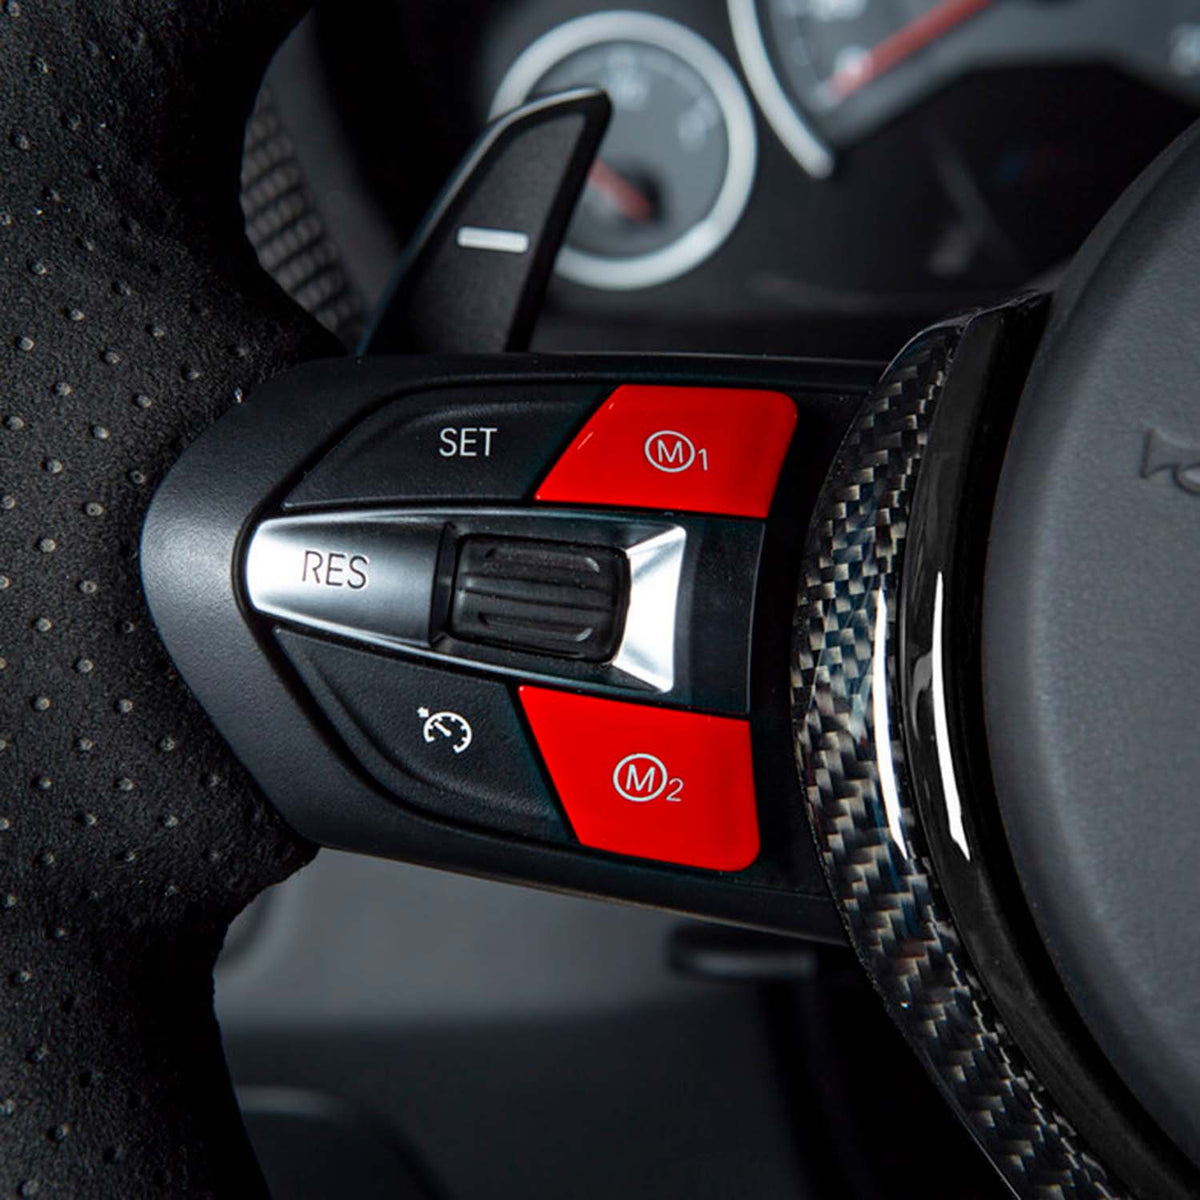 SHFT BMW Steering Wheel M Mode Buttons M1 & M2 In Red-R44 Performance